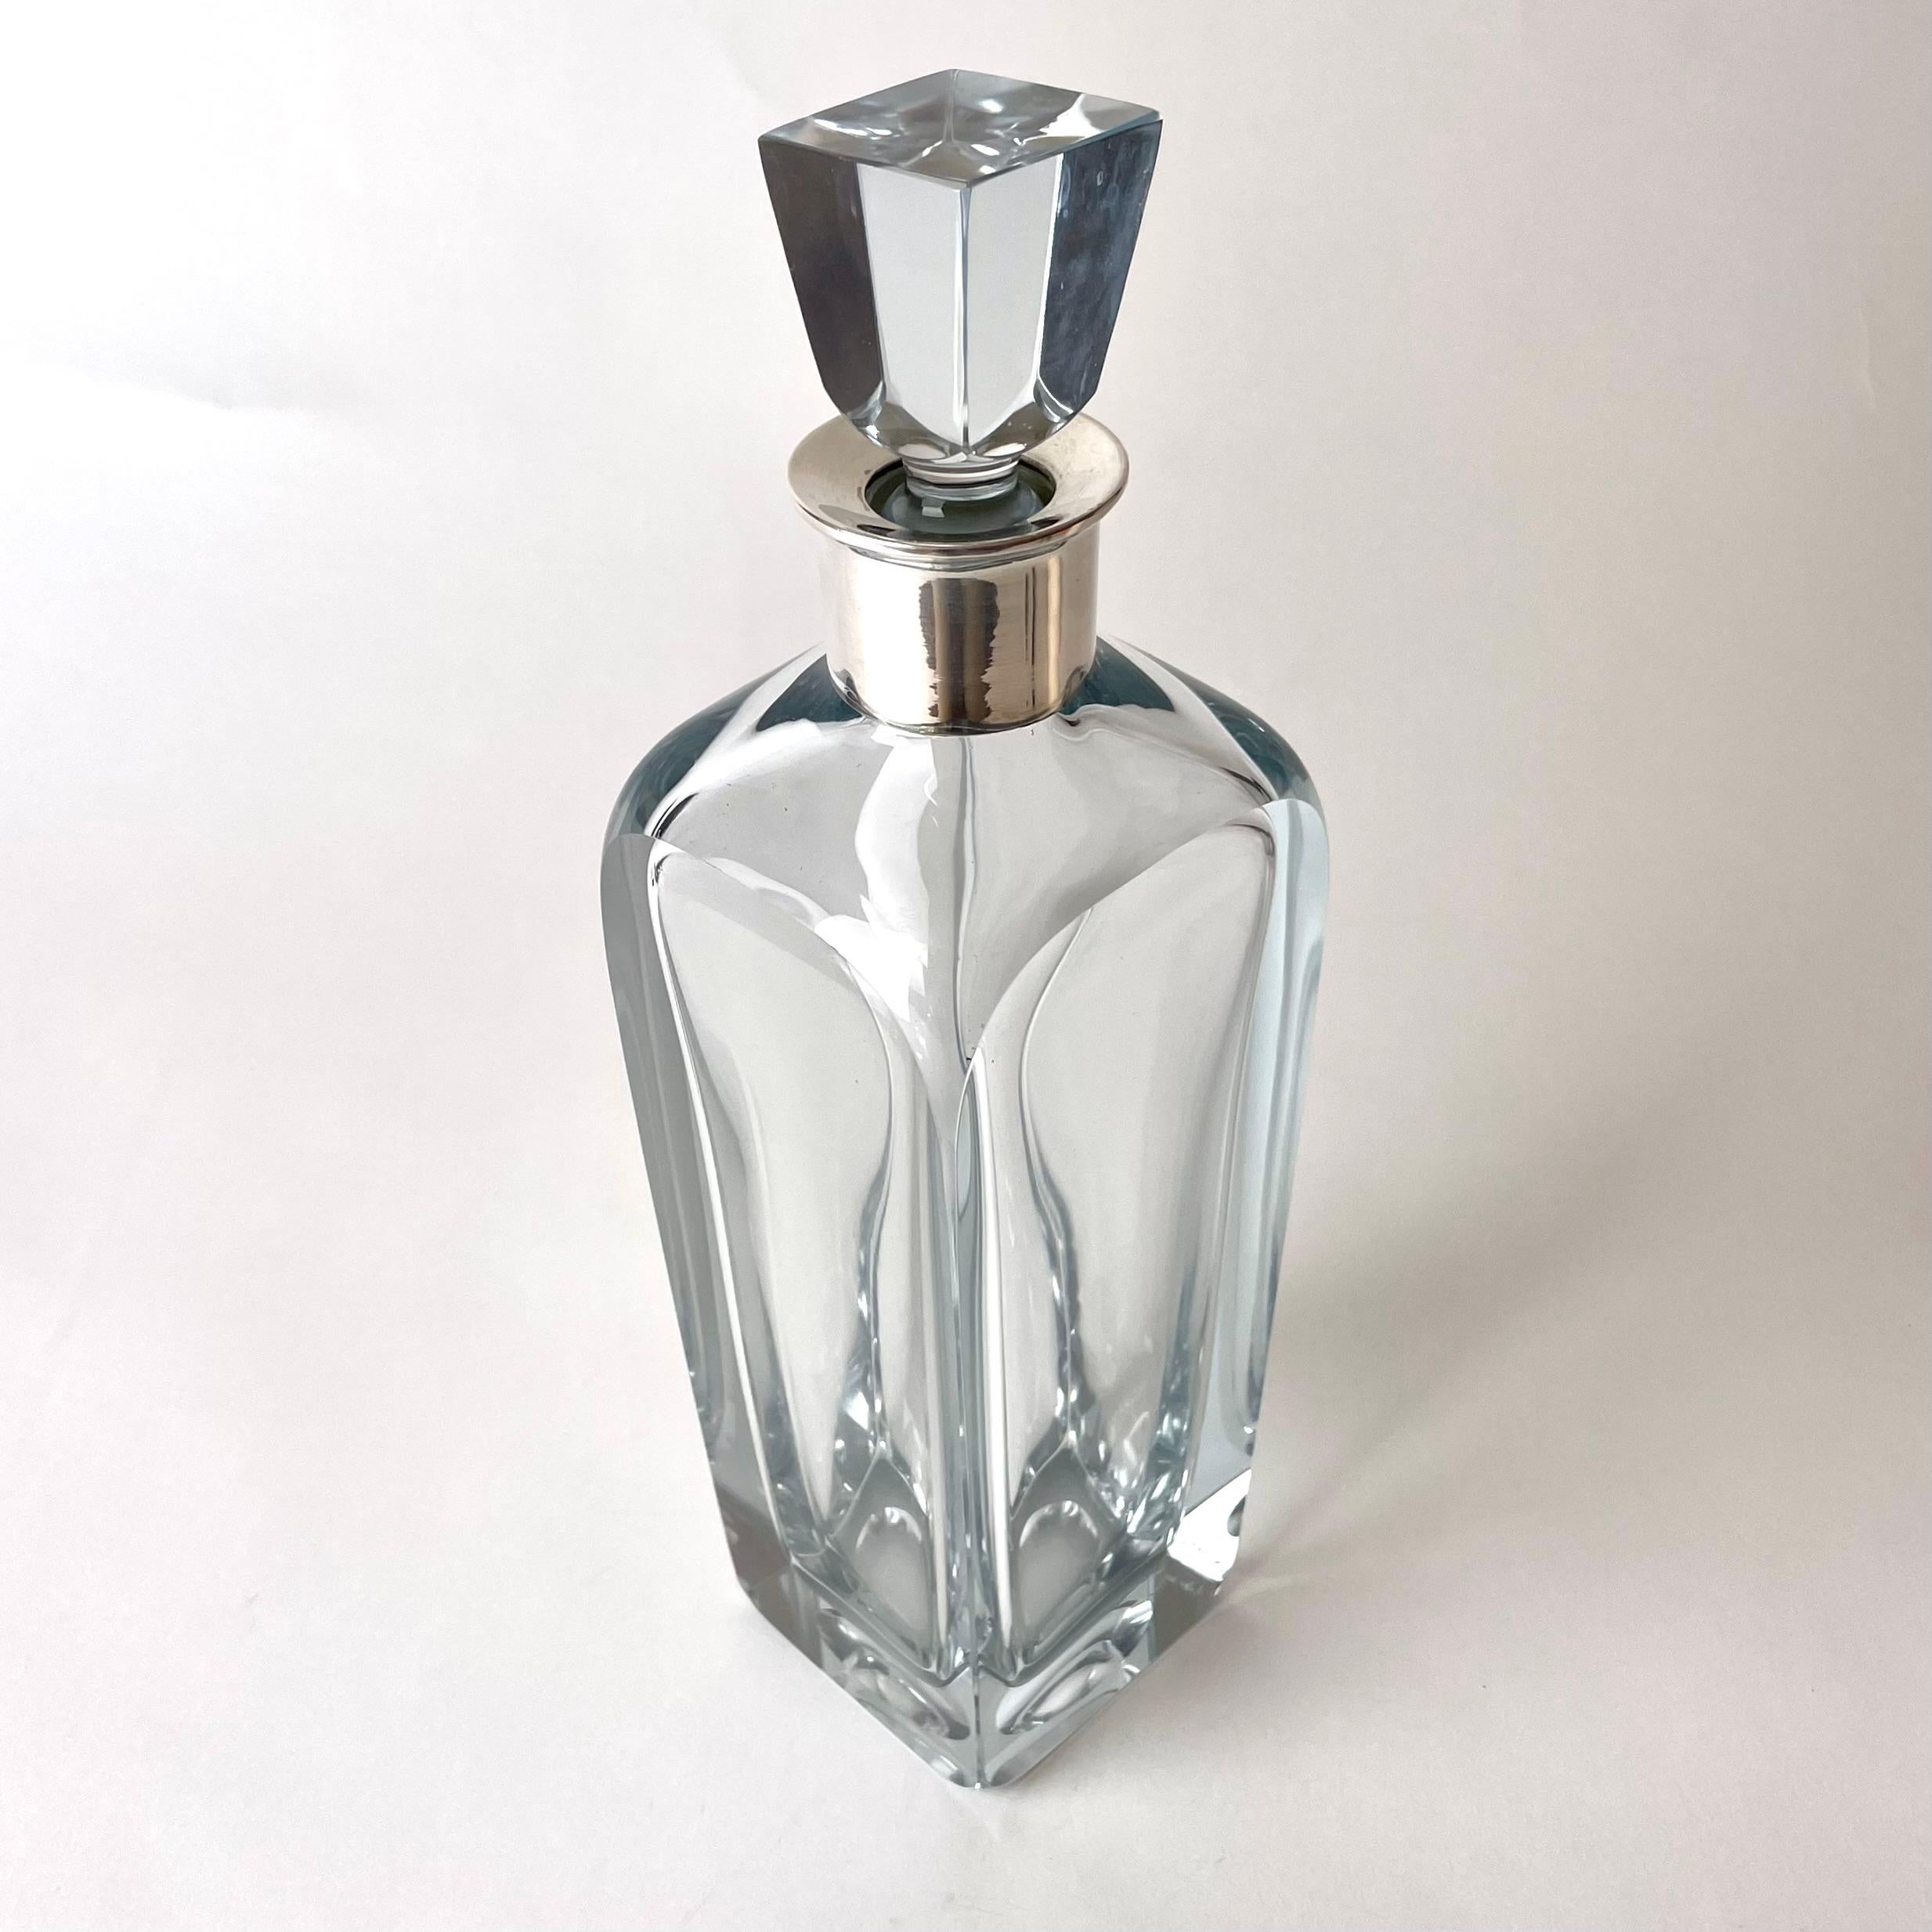 Elegant Whiskey decanter in chrystal glass with silver mounting from 1944 For Sale 2